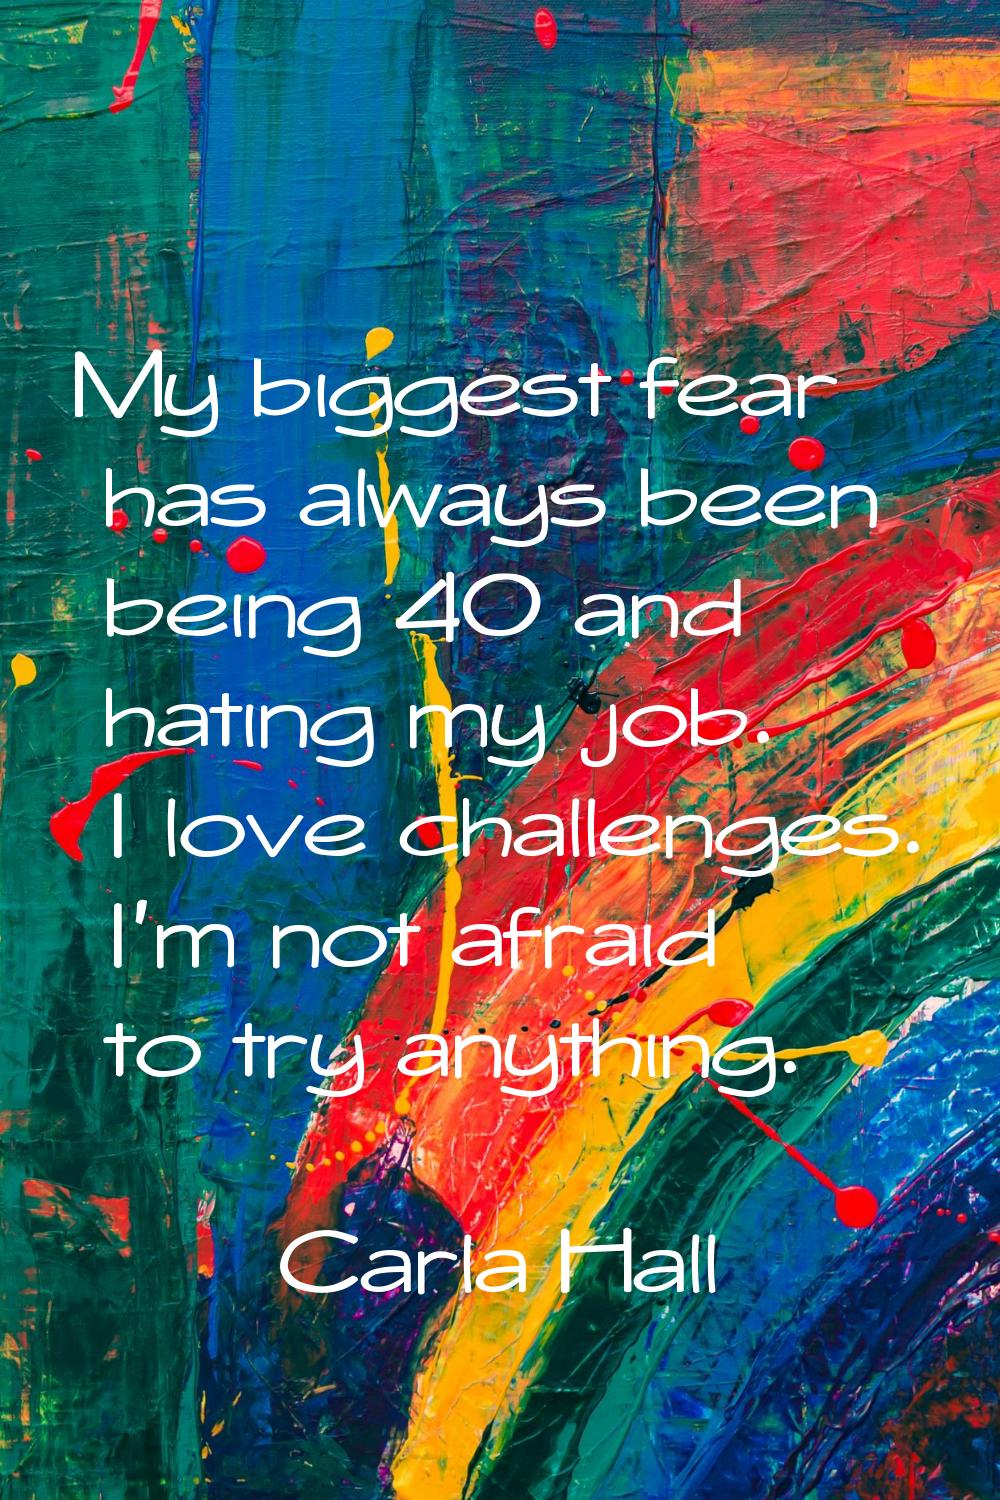 My biggest fear has always been being 40 and hating my job. I love challenges. I'm not afraid to tr